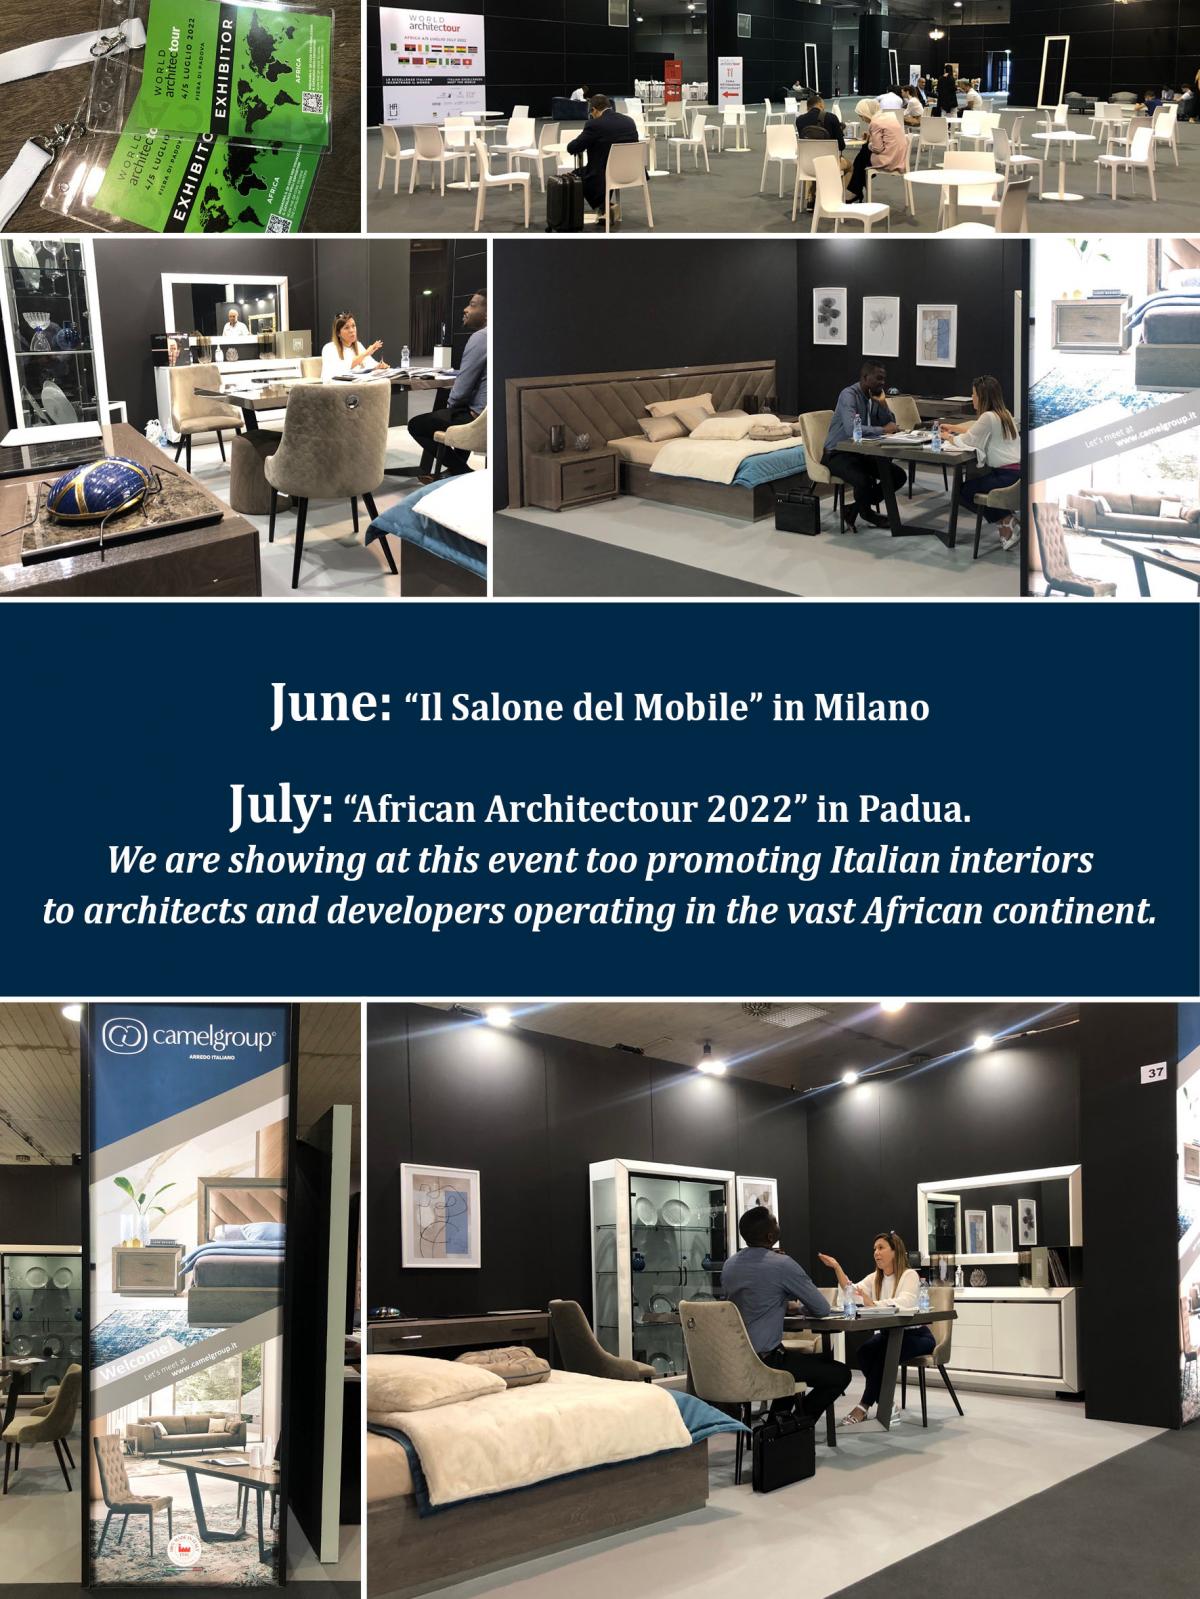 July “African Architectour 2022” in Padua.